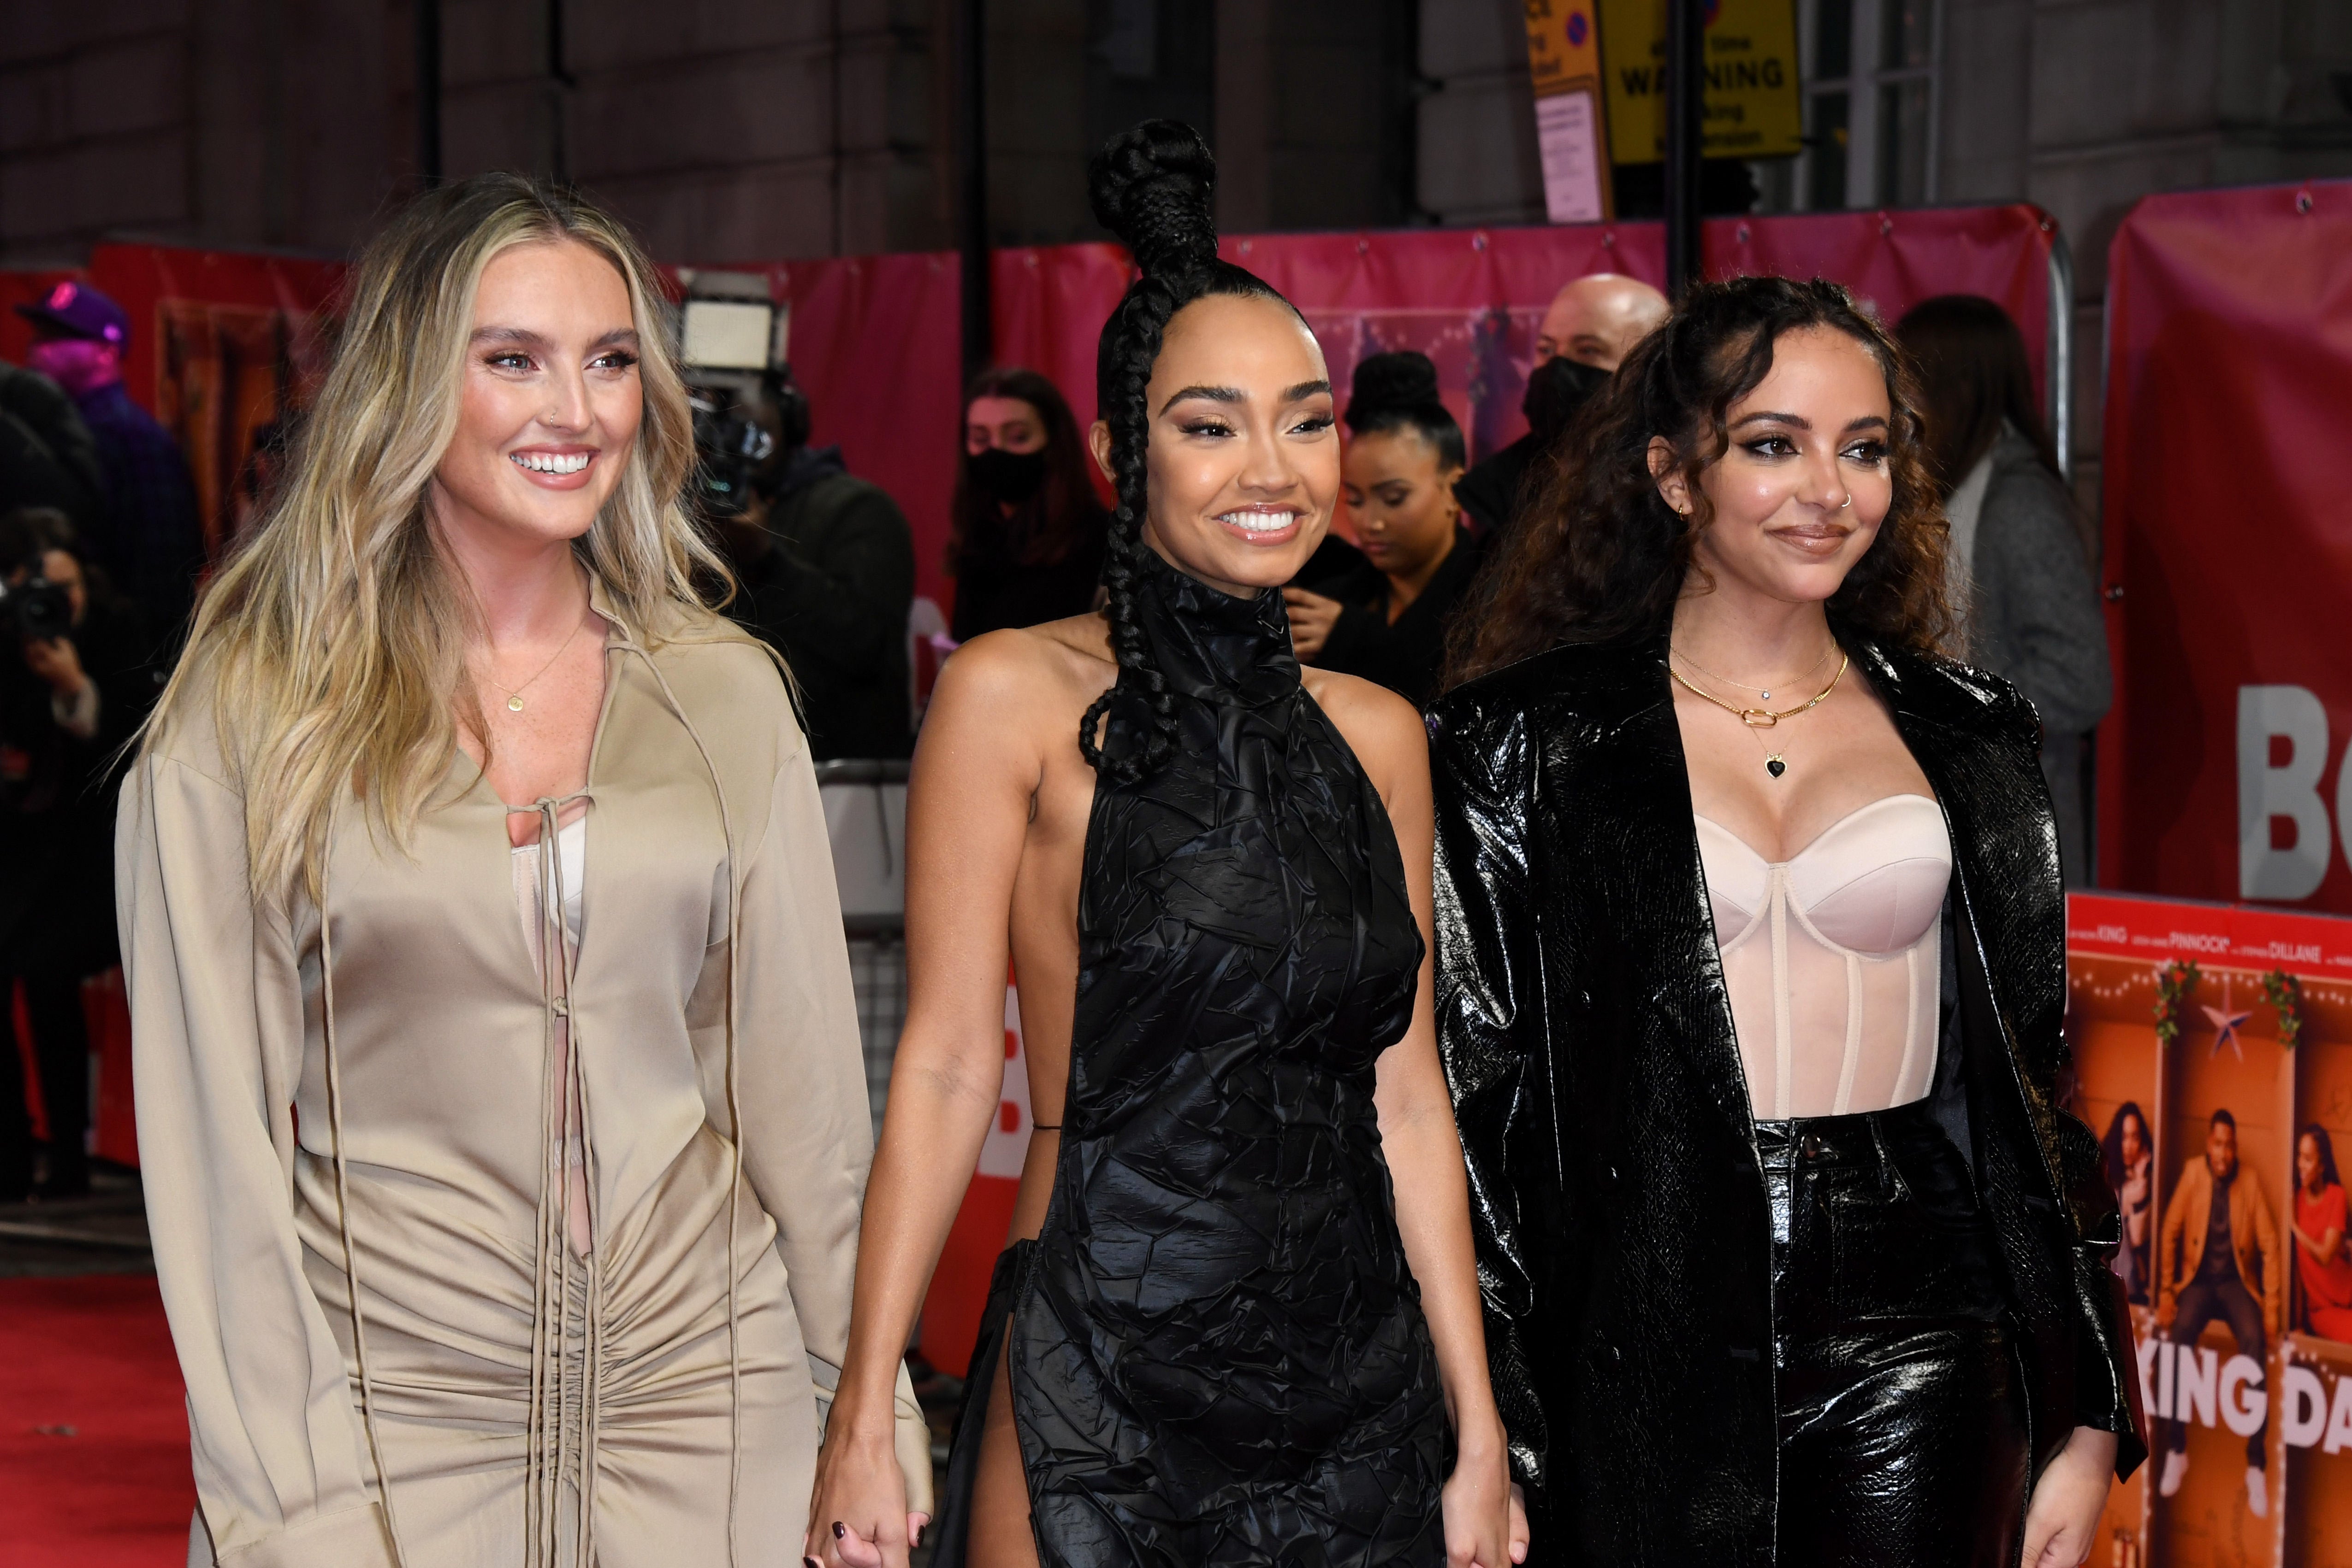 Little Mix members Perrie Edwards (left) and Jade Thirlwall (right) support Leigh-Anne Pinnock at the premiere of her film debut, ‘Boxing Day'